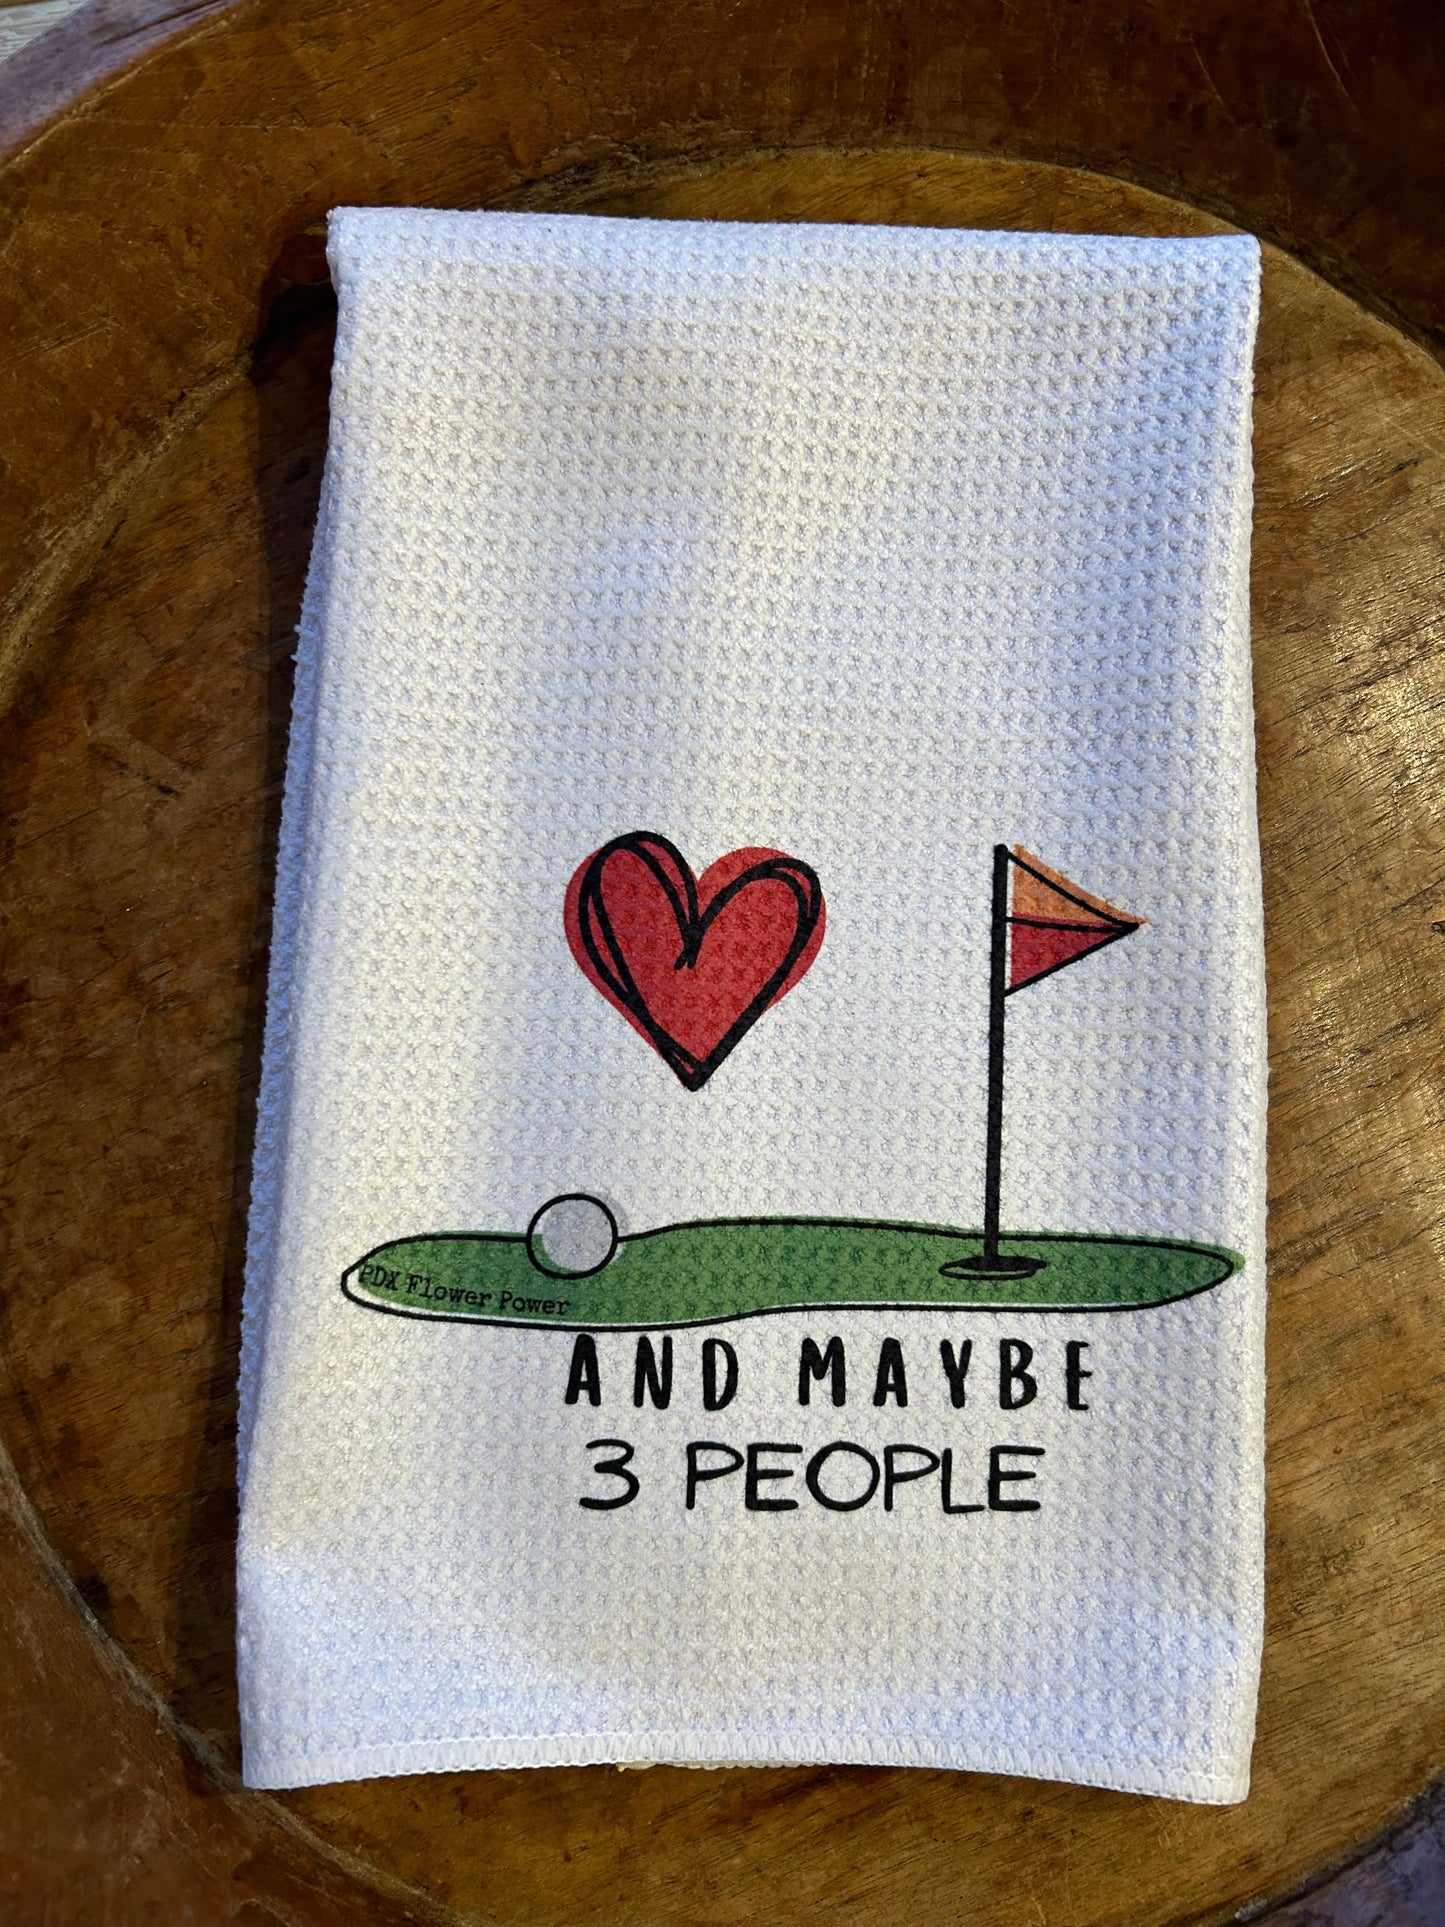 Love golf and maybe 3 people waffle weave towel, gift for golfers, fun golf towel.